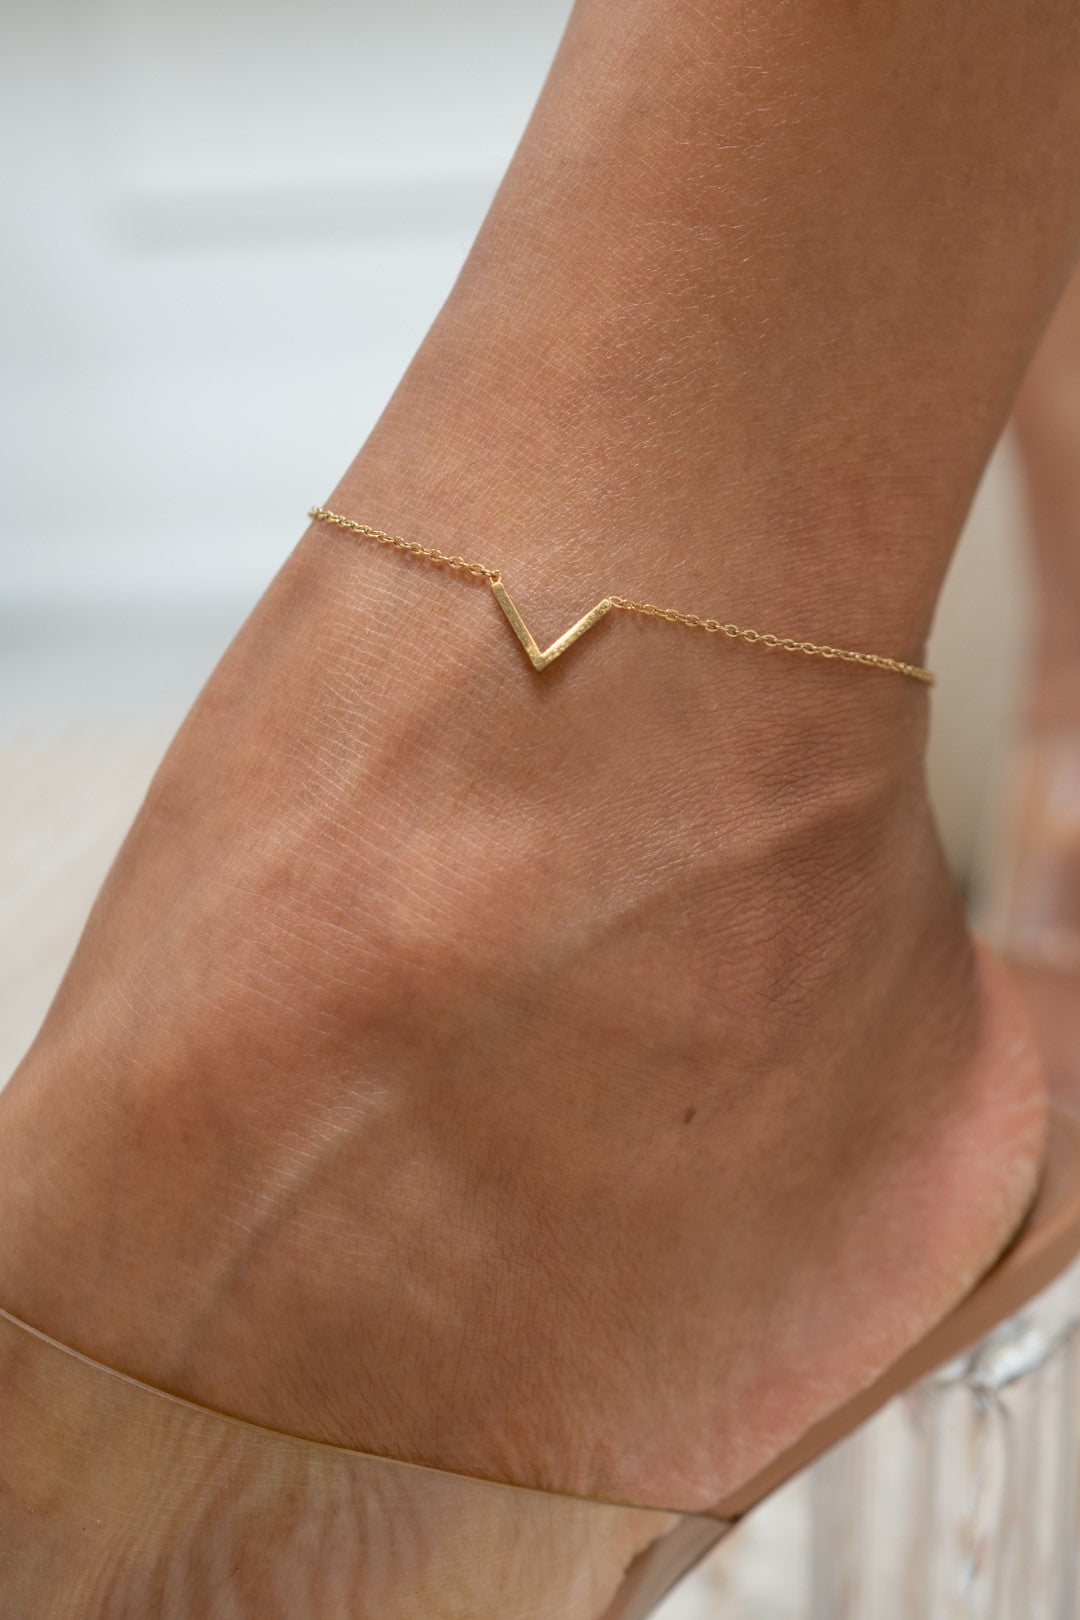 Harma Jewelry 14k gold plated Minimal Gold Tone Chevron Anklet